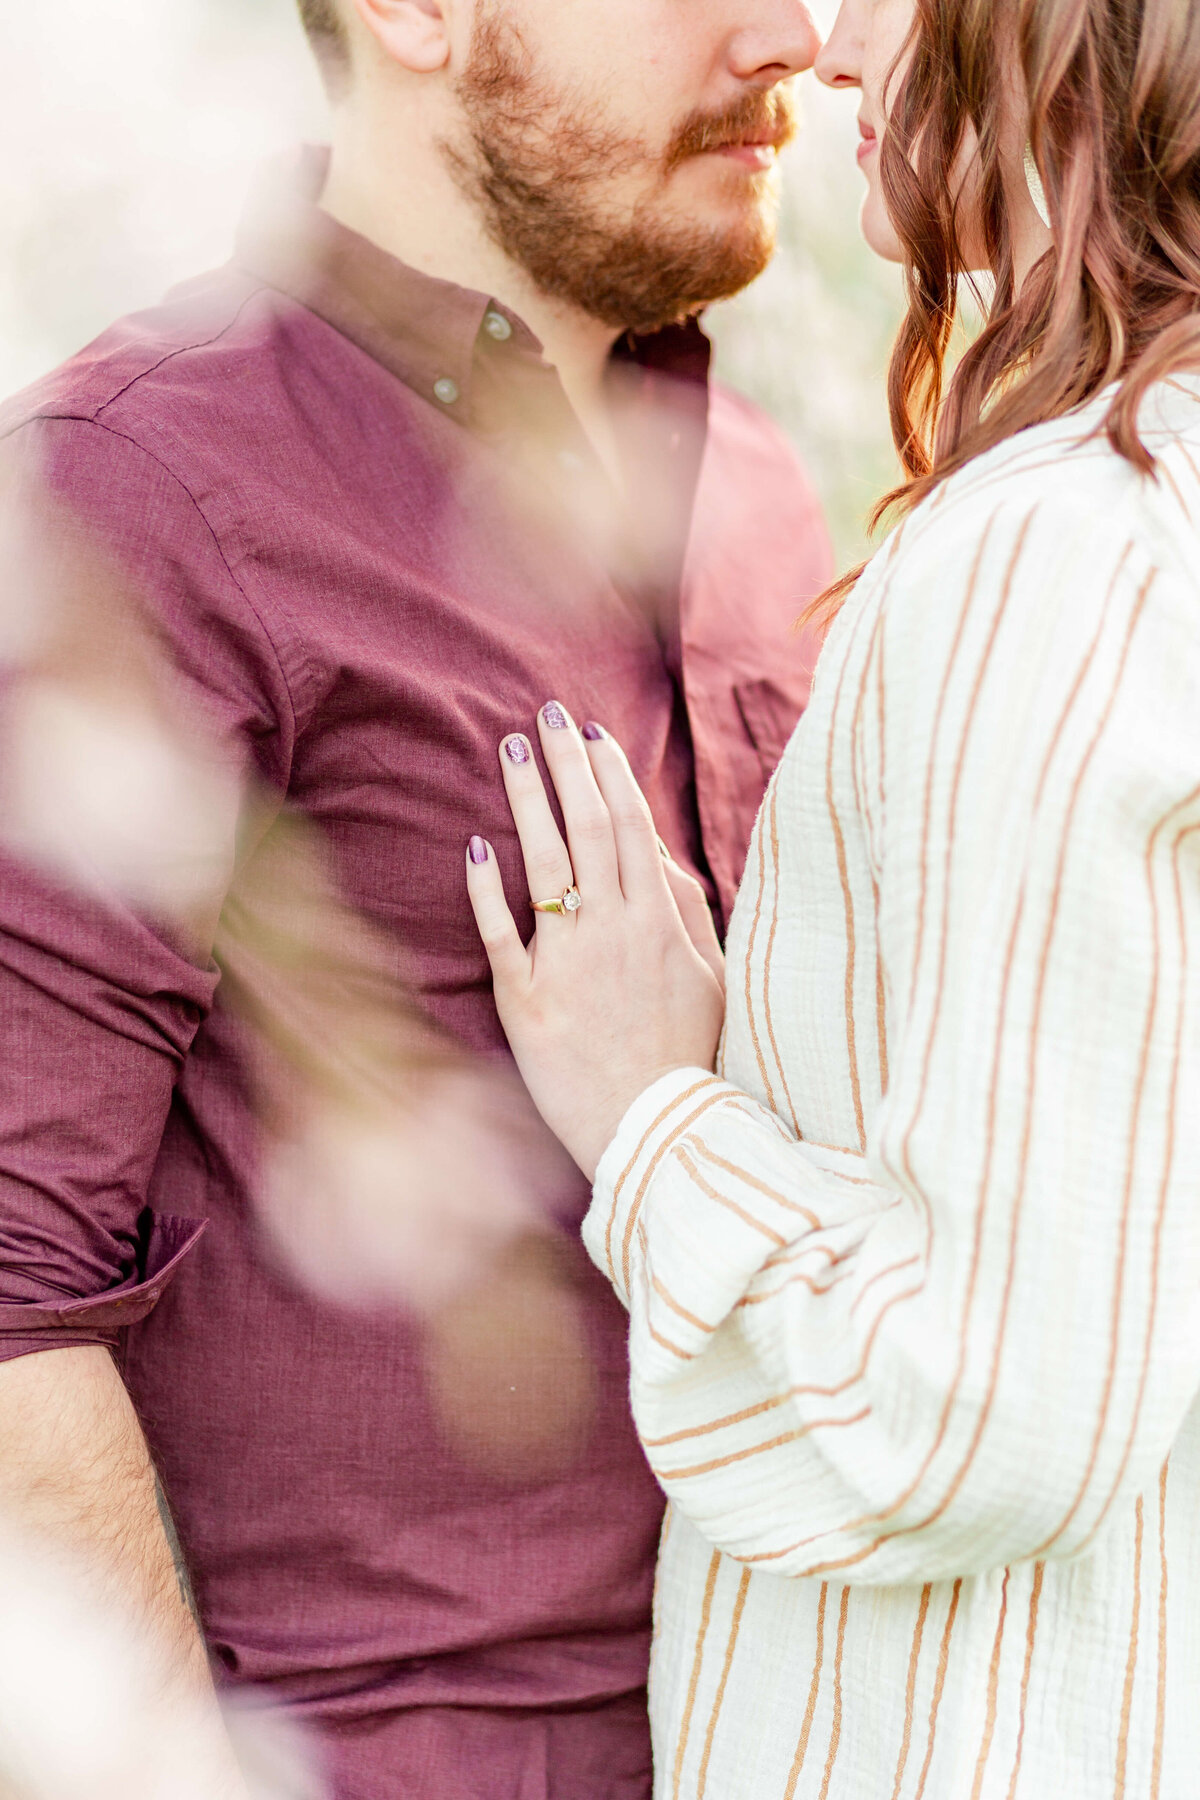 Light-bright-and-airy-engagement-photos-by-Bethany-Lane-Photography-4